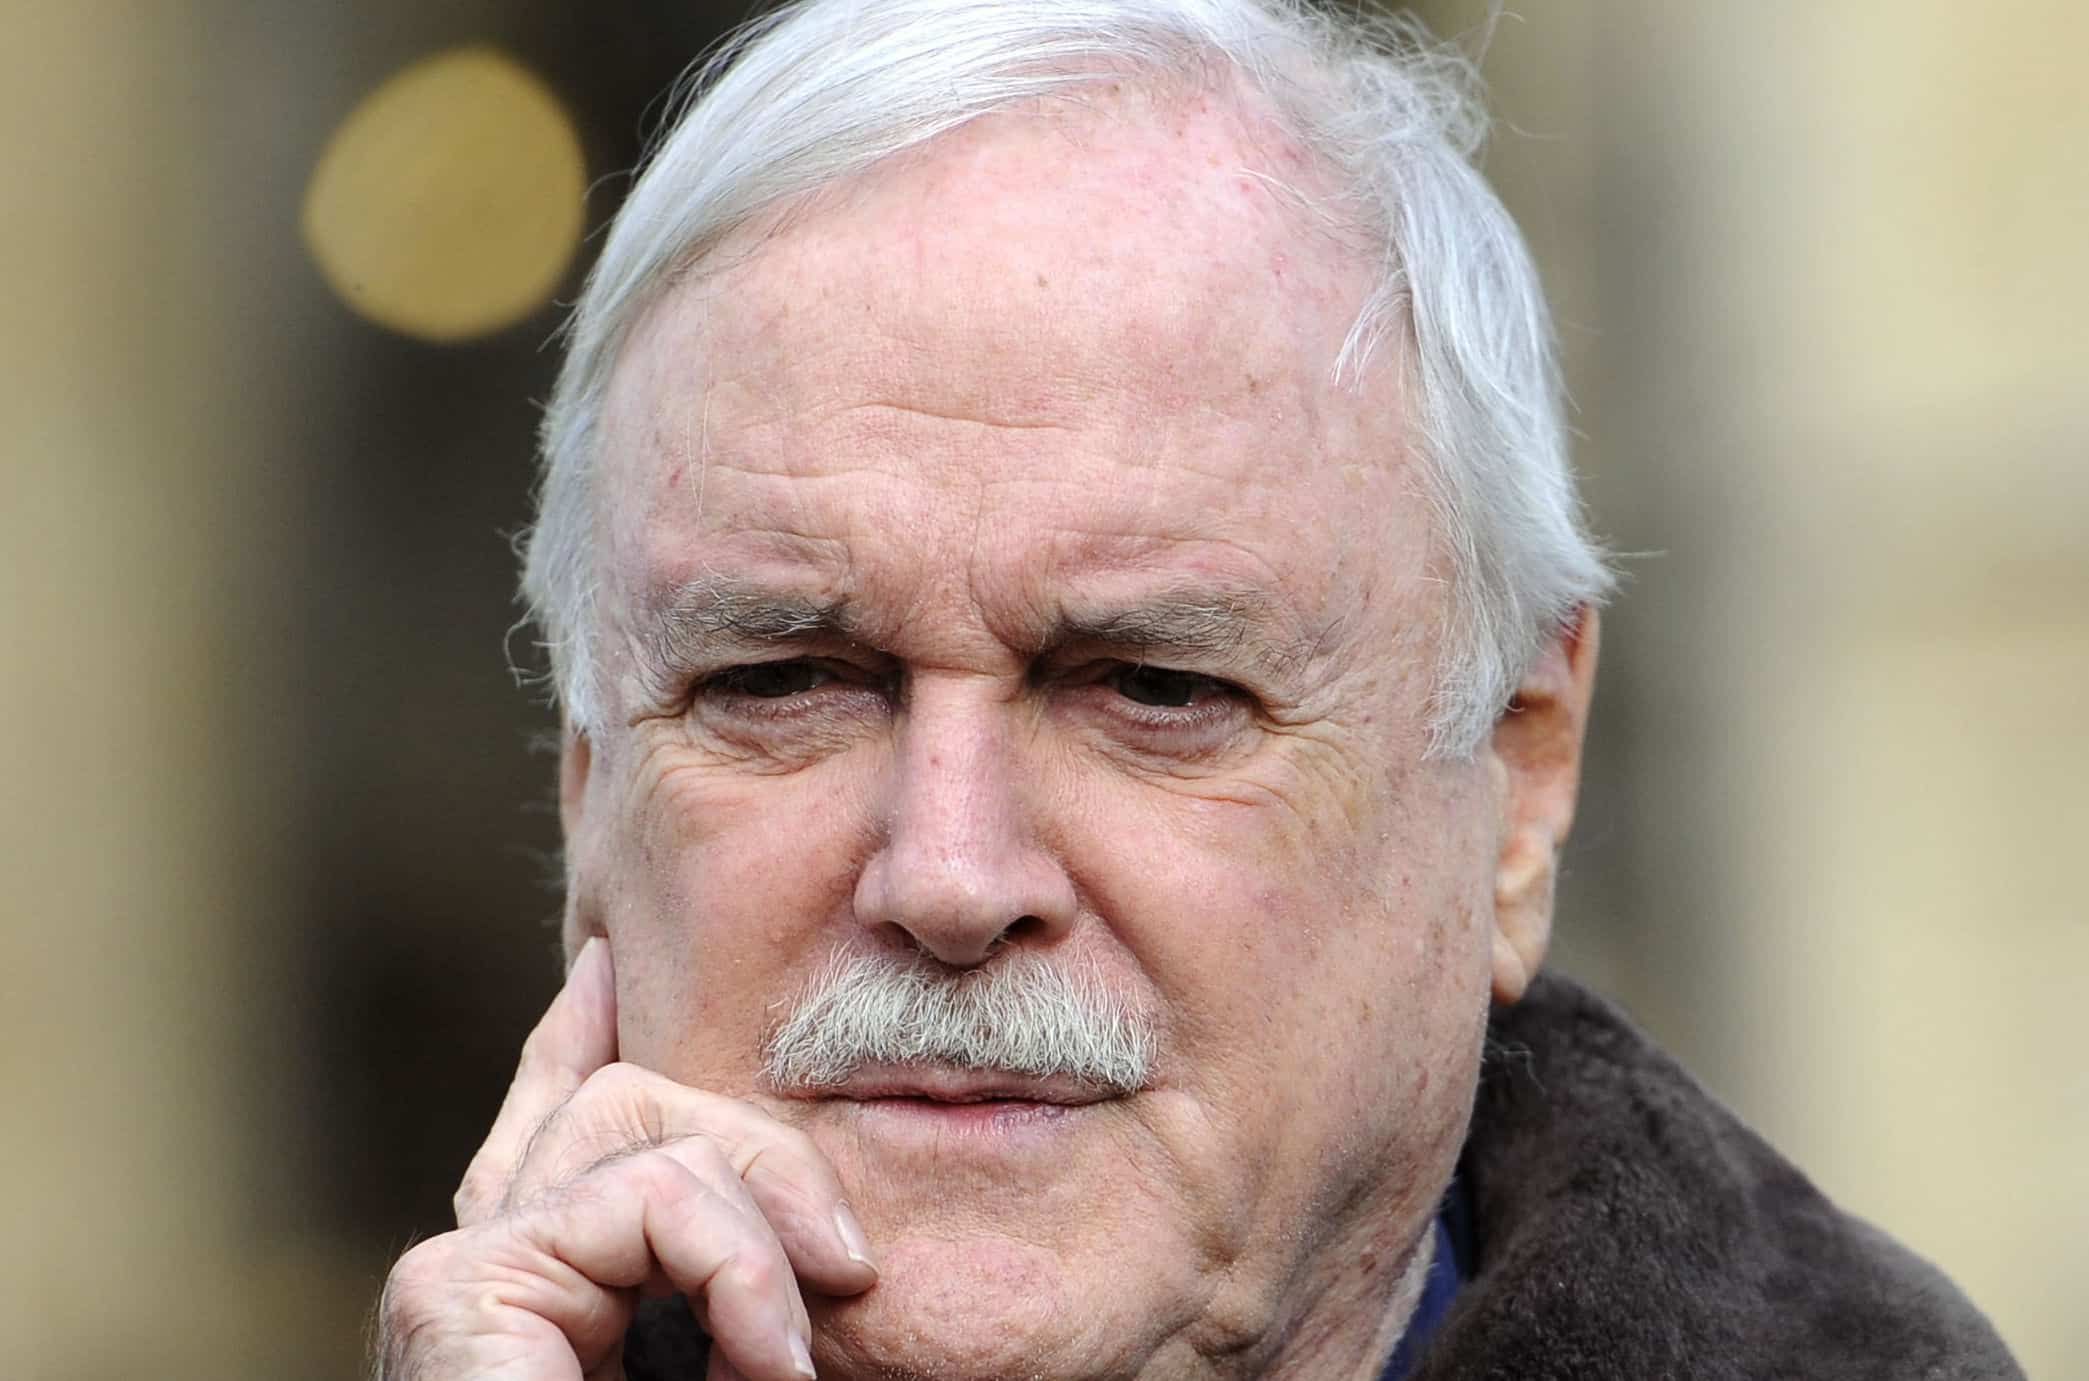 Cleese struggling to get celebs to appear on his GB News ‘Dinosour Hour’ show